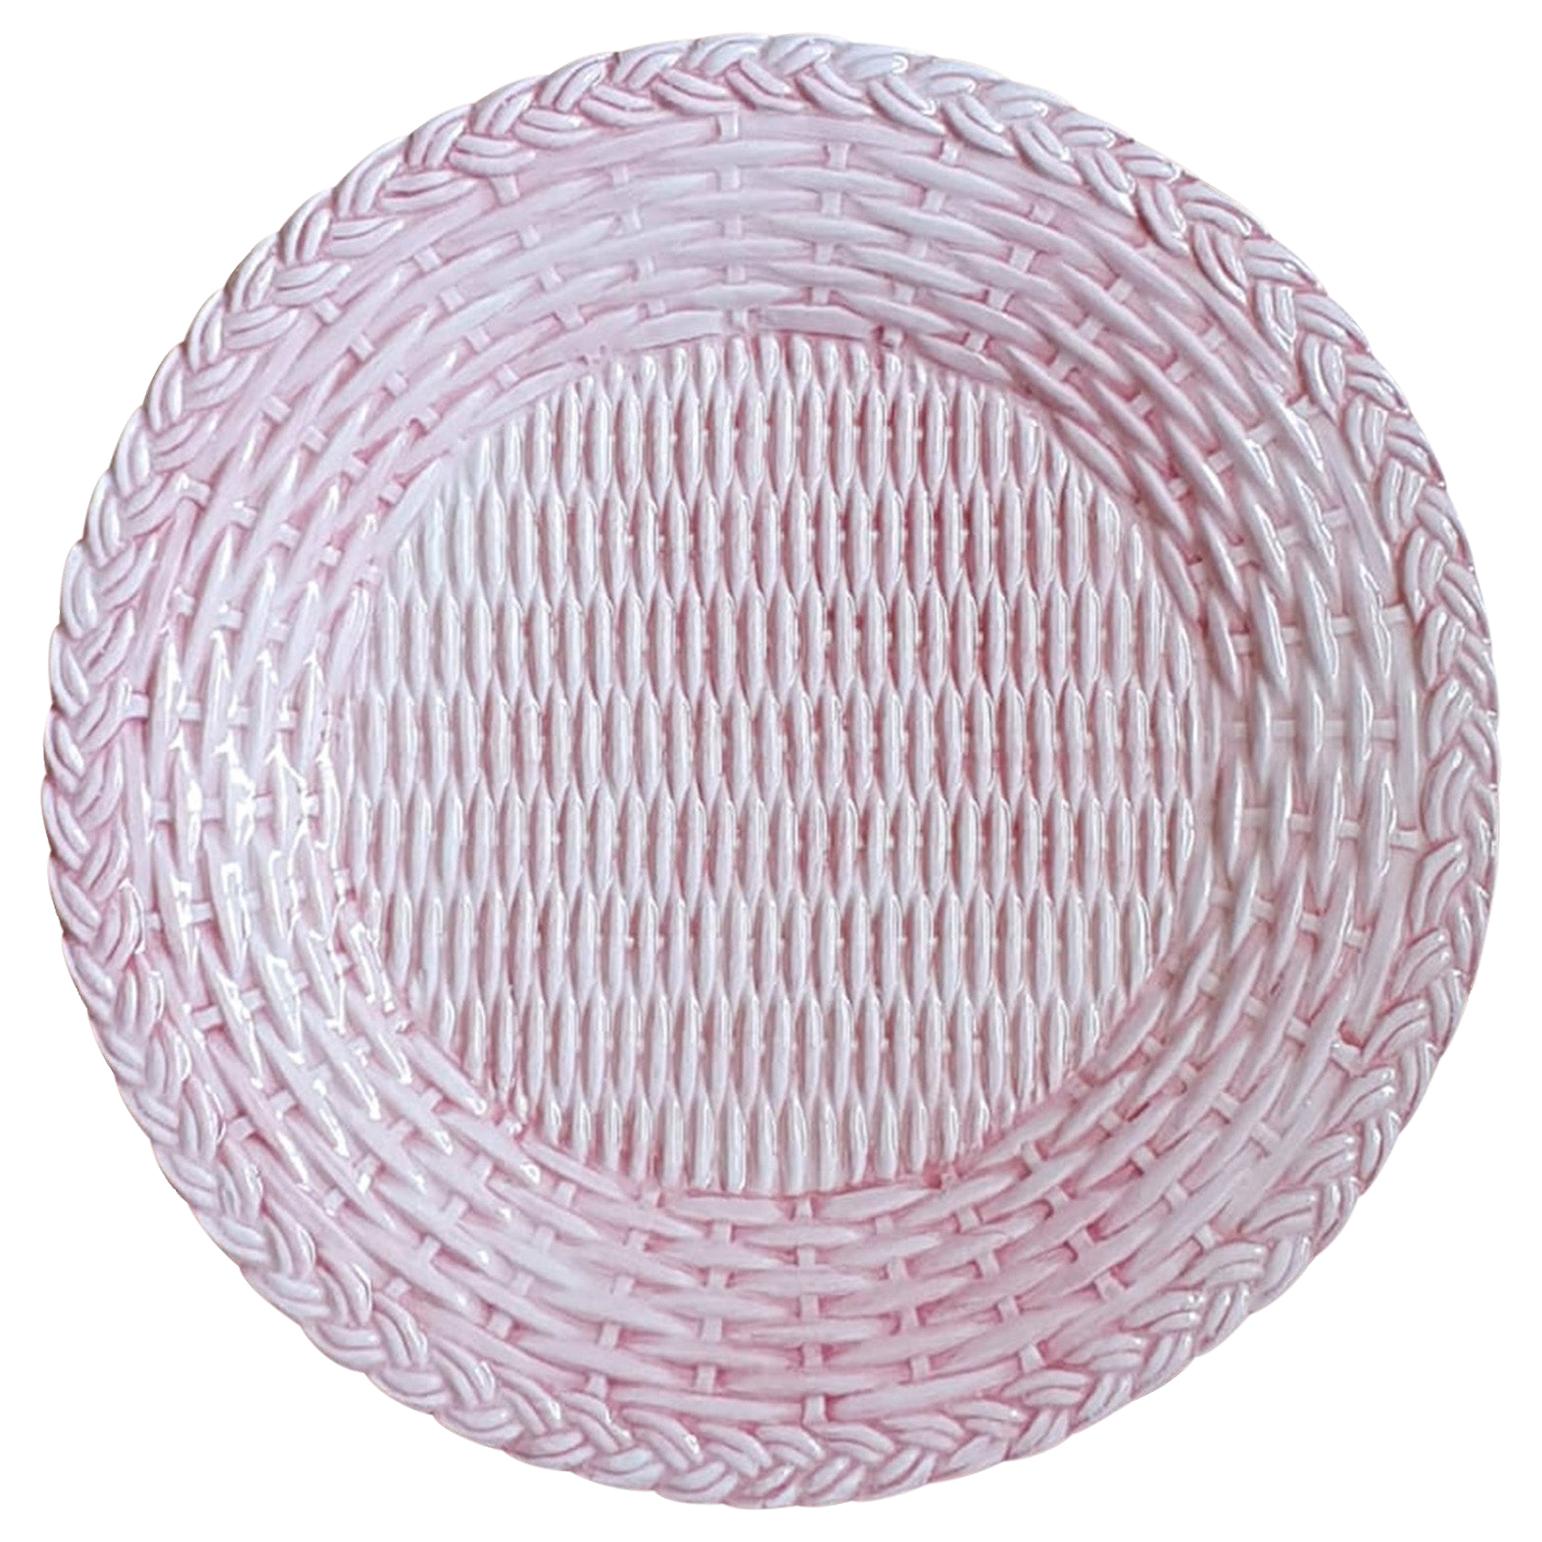 Set of 4 Ceramic Dessert Wicker Pink Plates Made in Italy